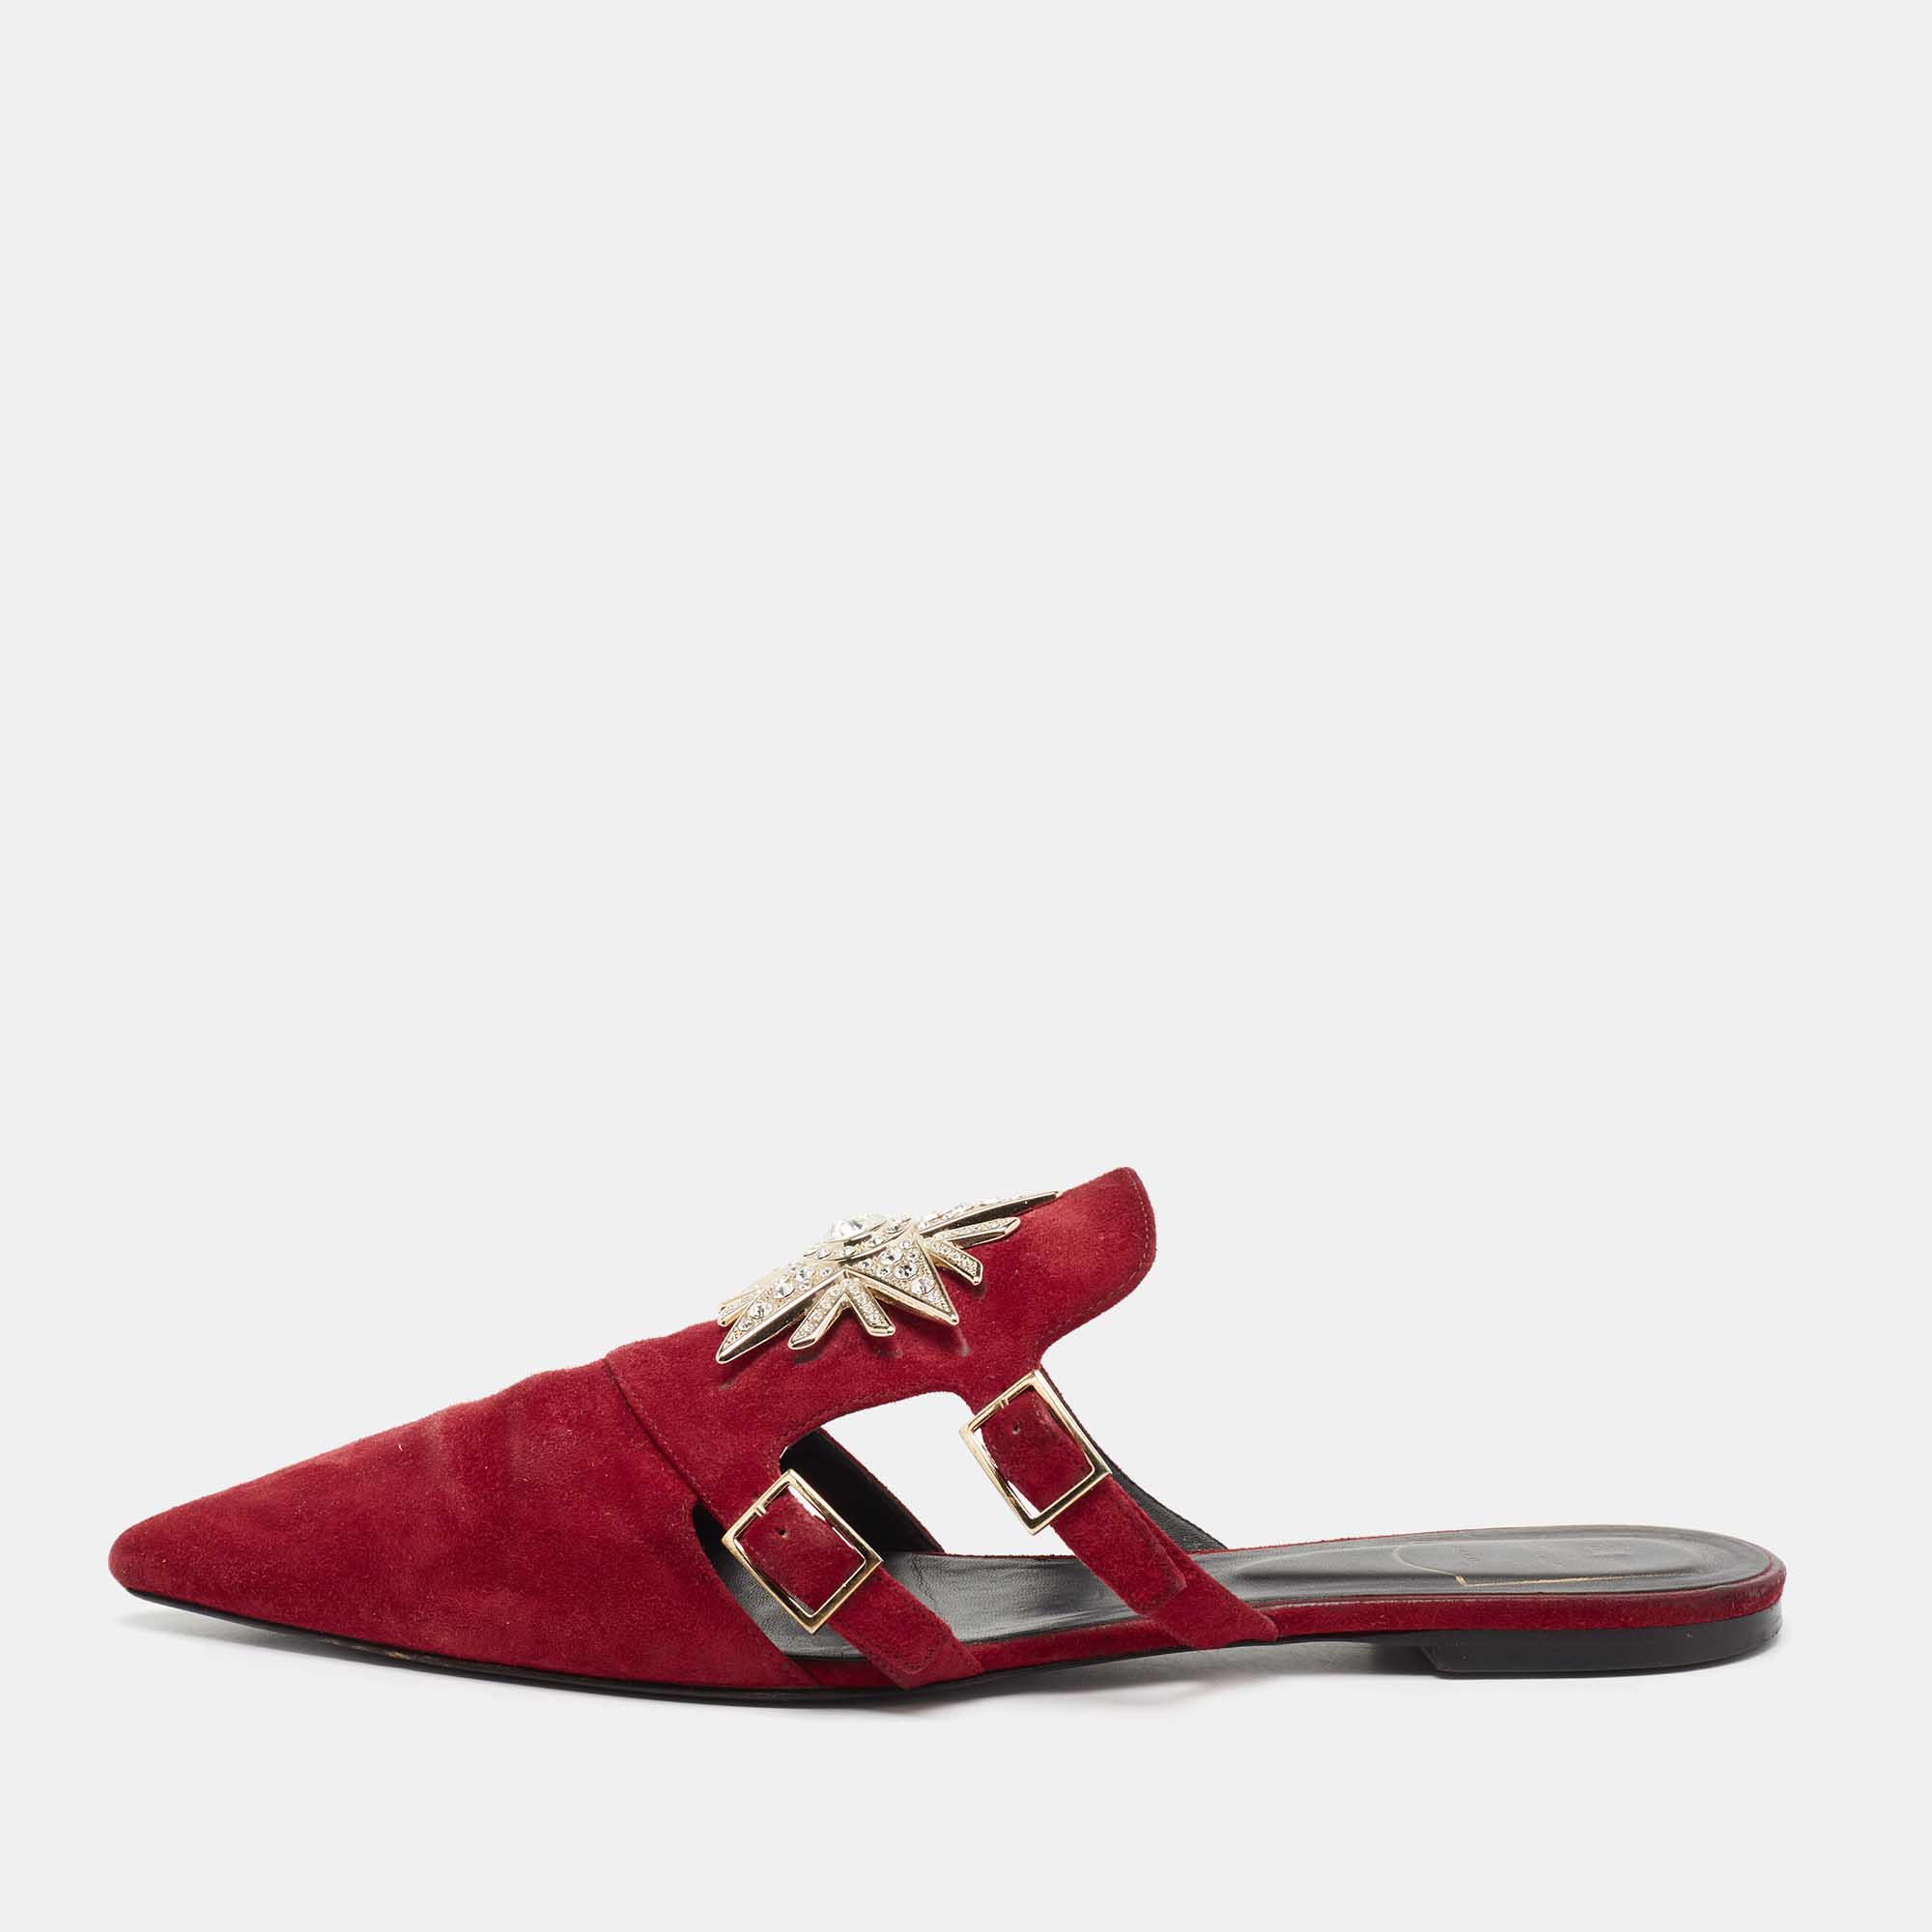 Roger Vivier  Red Suede Star Strass Mule Flats Size 40